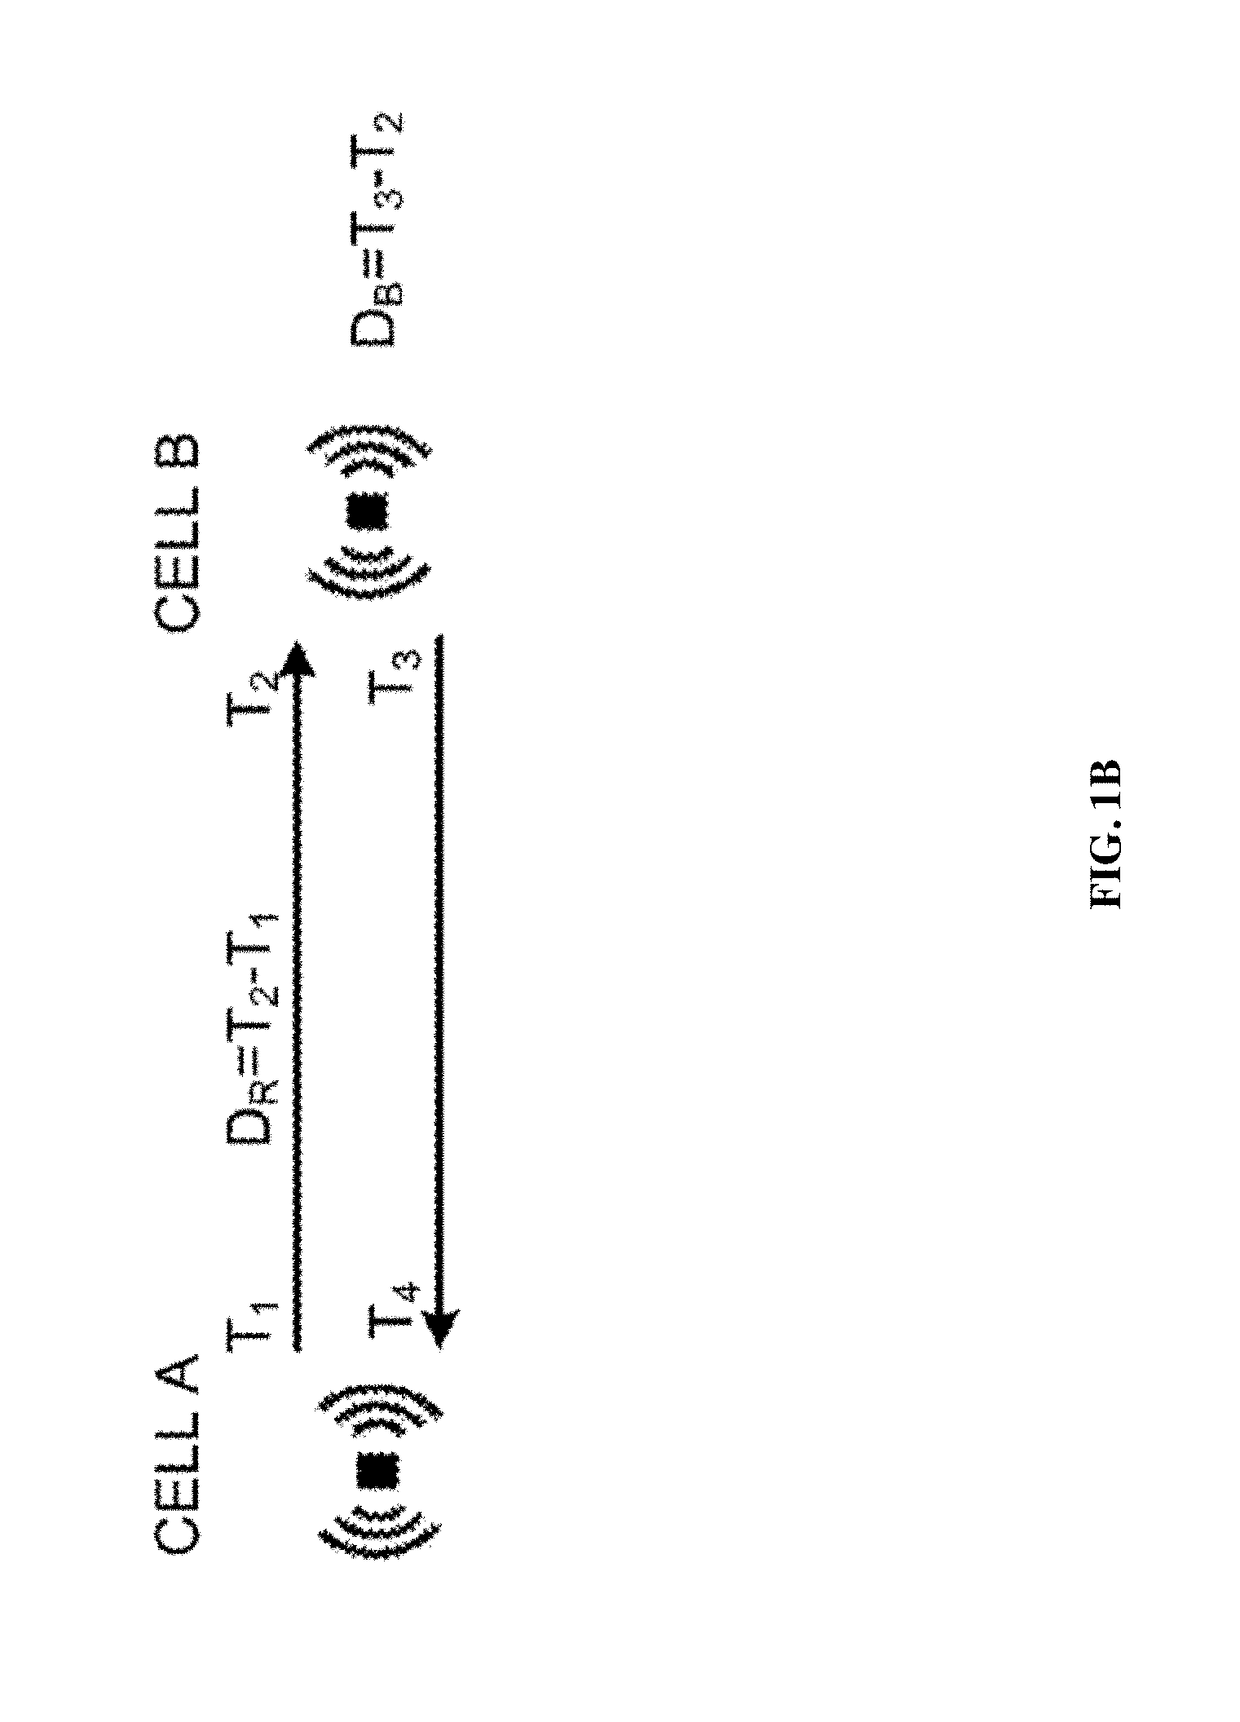 Angle of Arrival Measurements Using RF Carrier Synchronization and Phase Alignment Methods